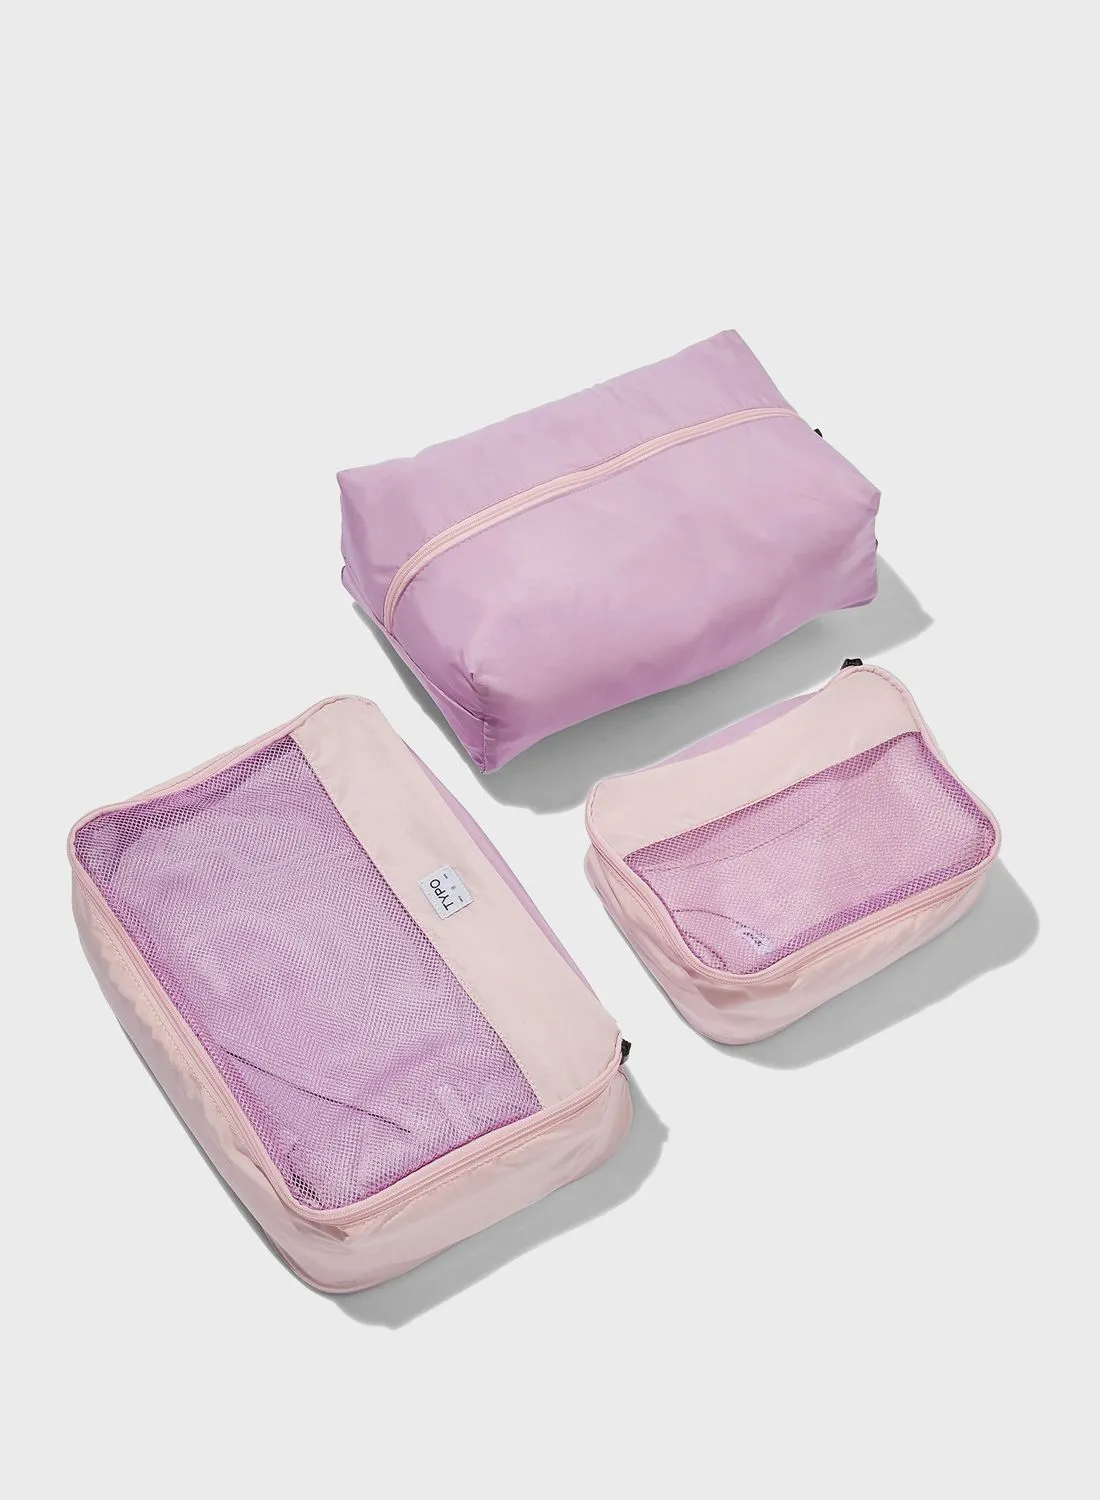 Typo Travel Packing Cubes